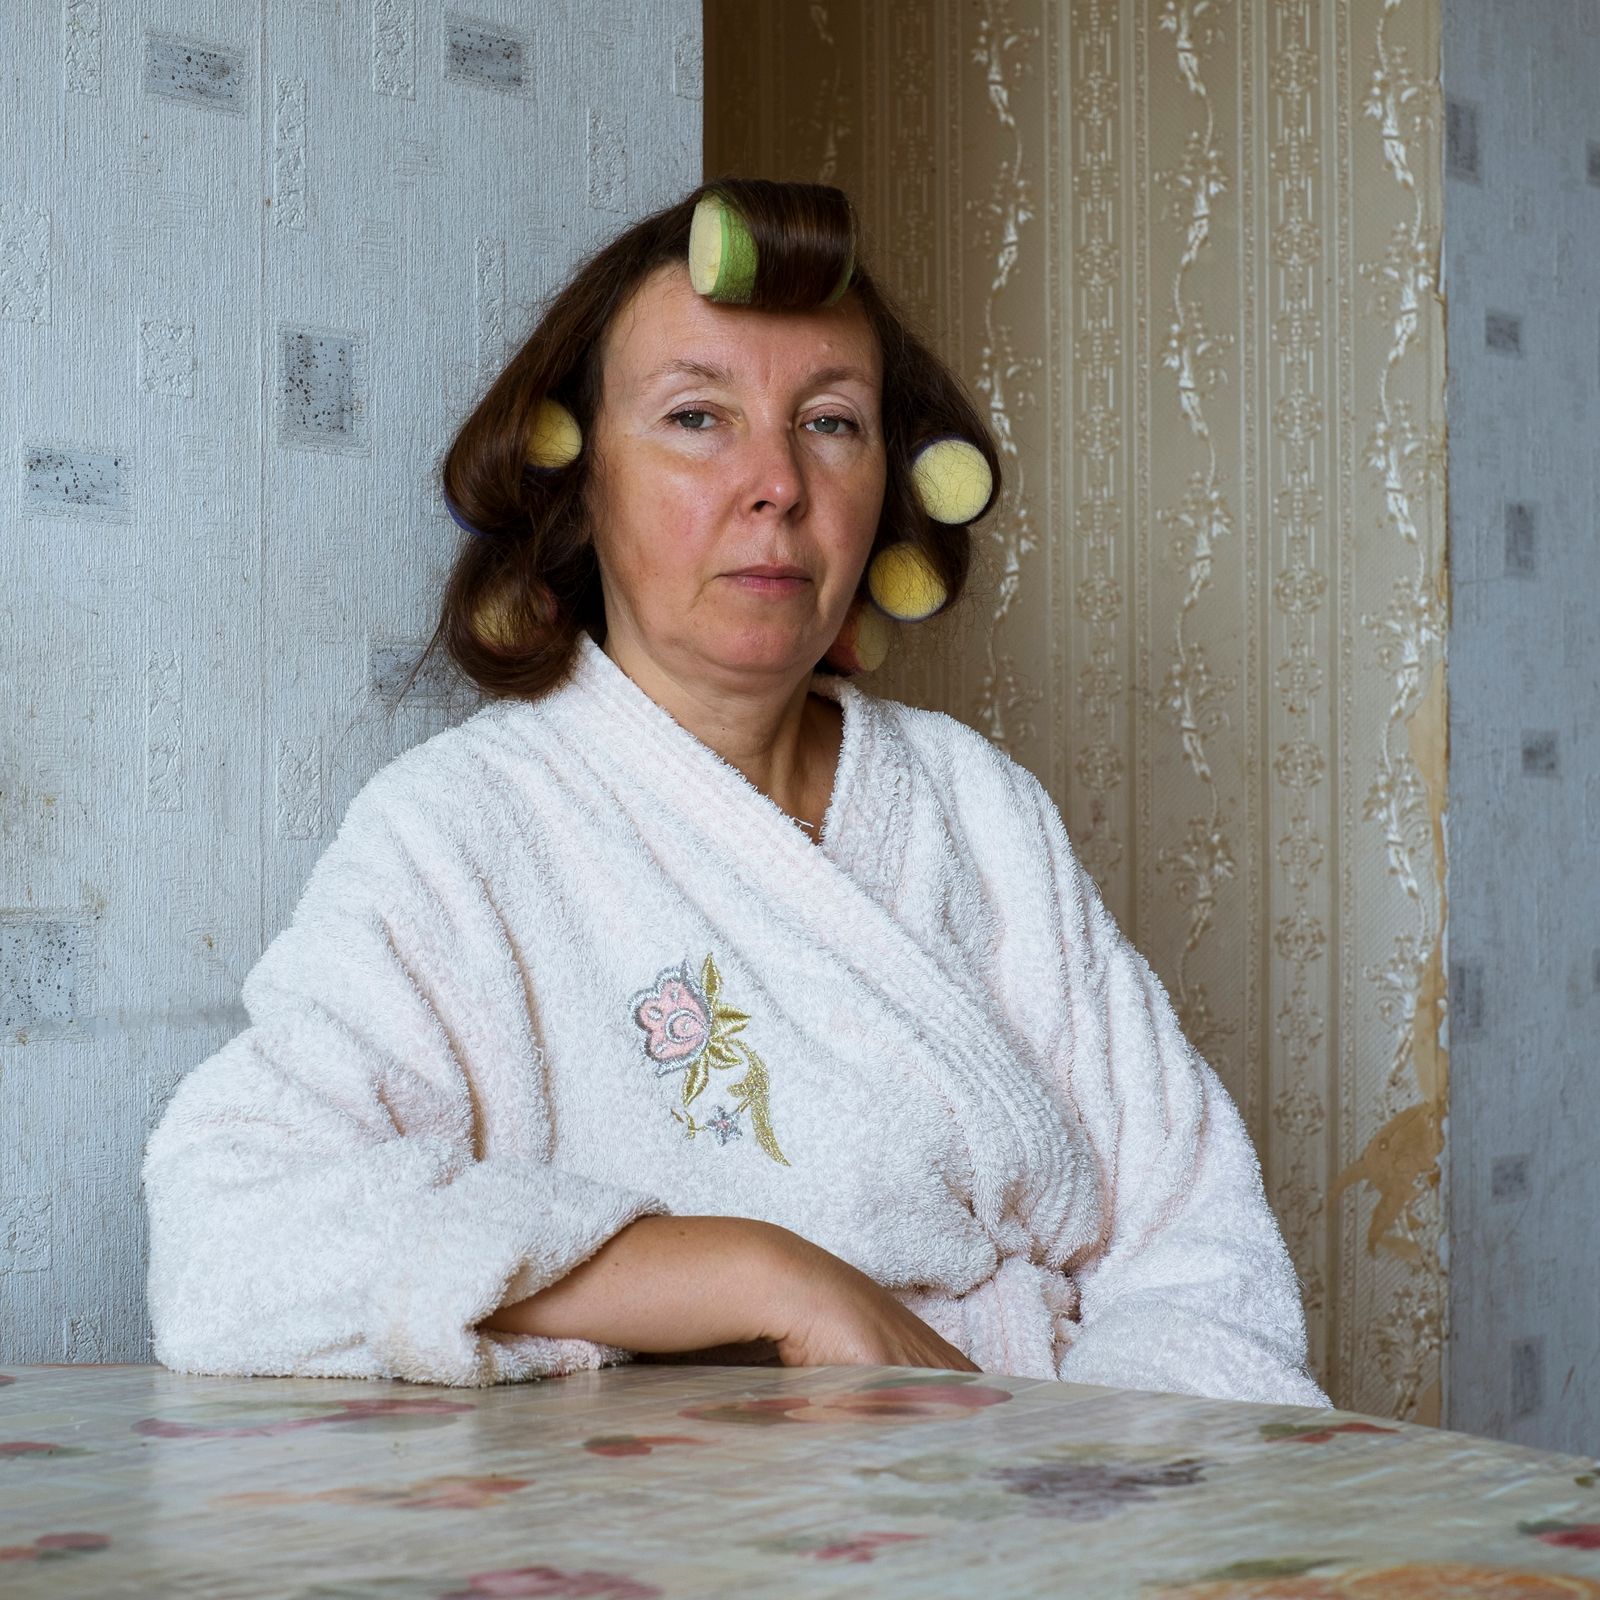 © Maria Quigley - Svetlana, my mother, sits at the kitchen table. She is in the process of getting ready to attend Babushka's friends funeral.